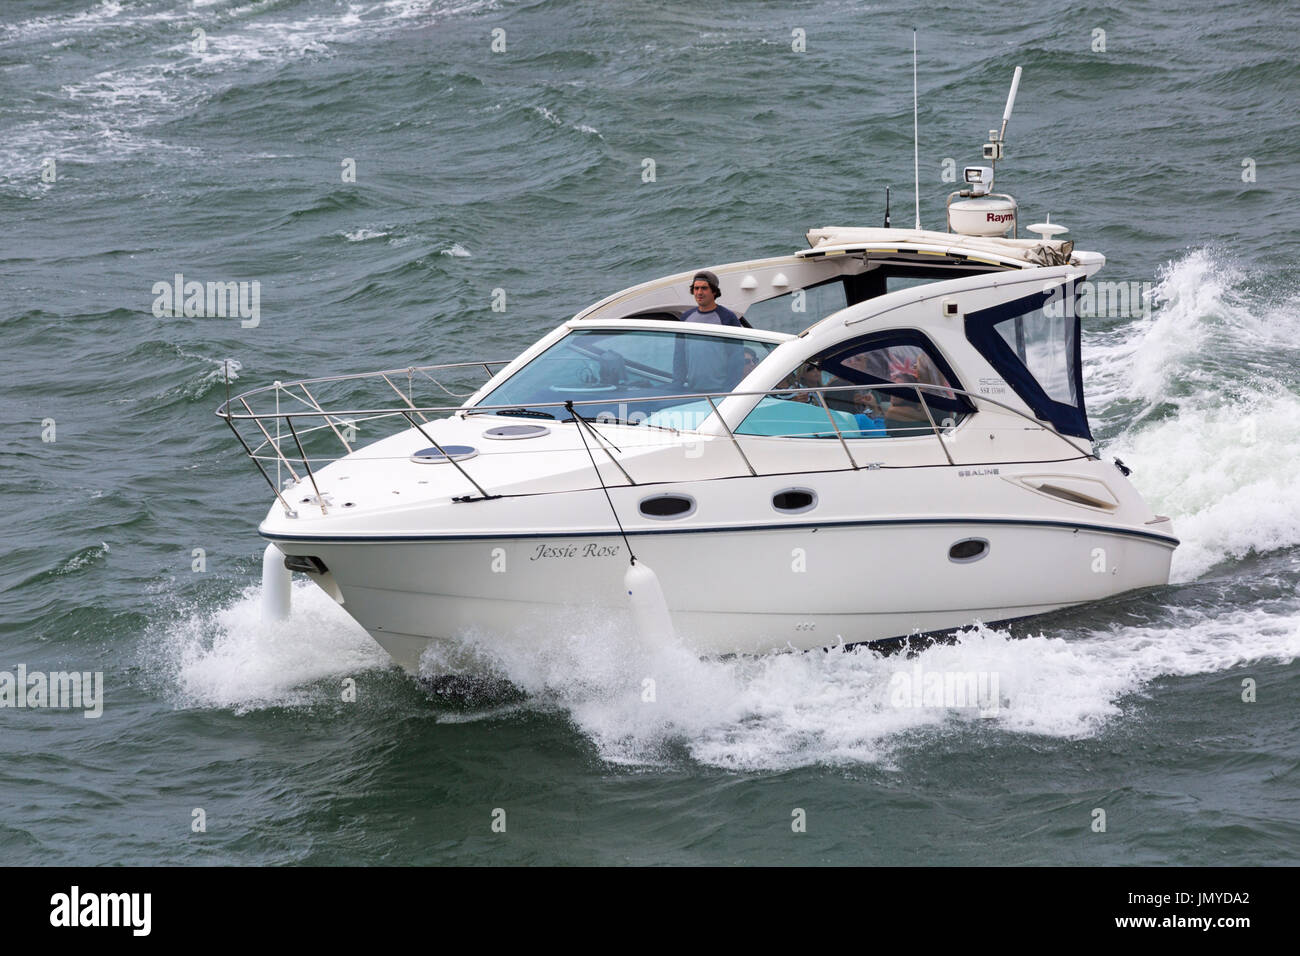 People in Sealine motor boat Jessie Rose in the Solent between Lymington and Yarmouth, Isle of Wight, Hampshire, UK in July Stock Photo